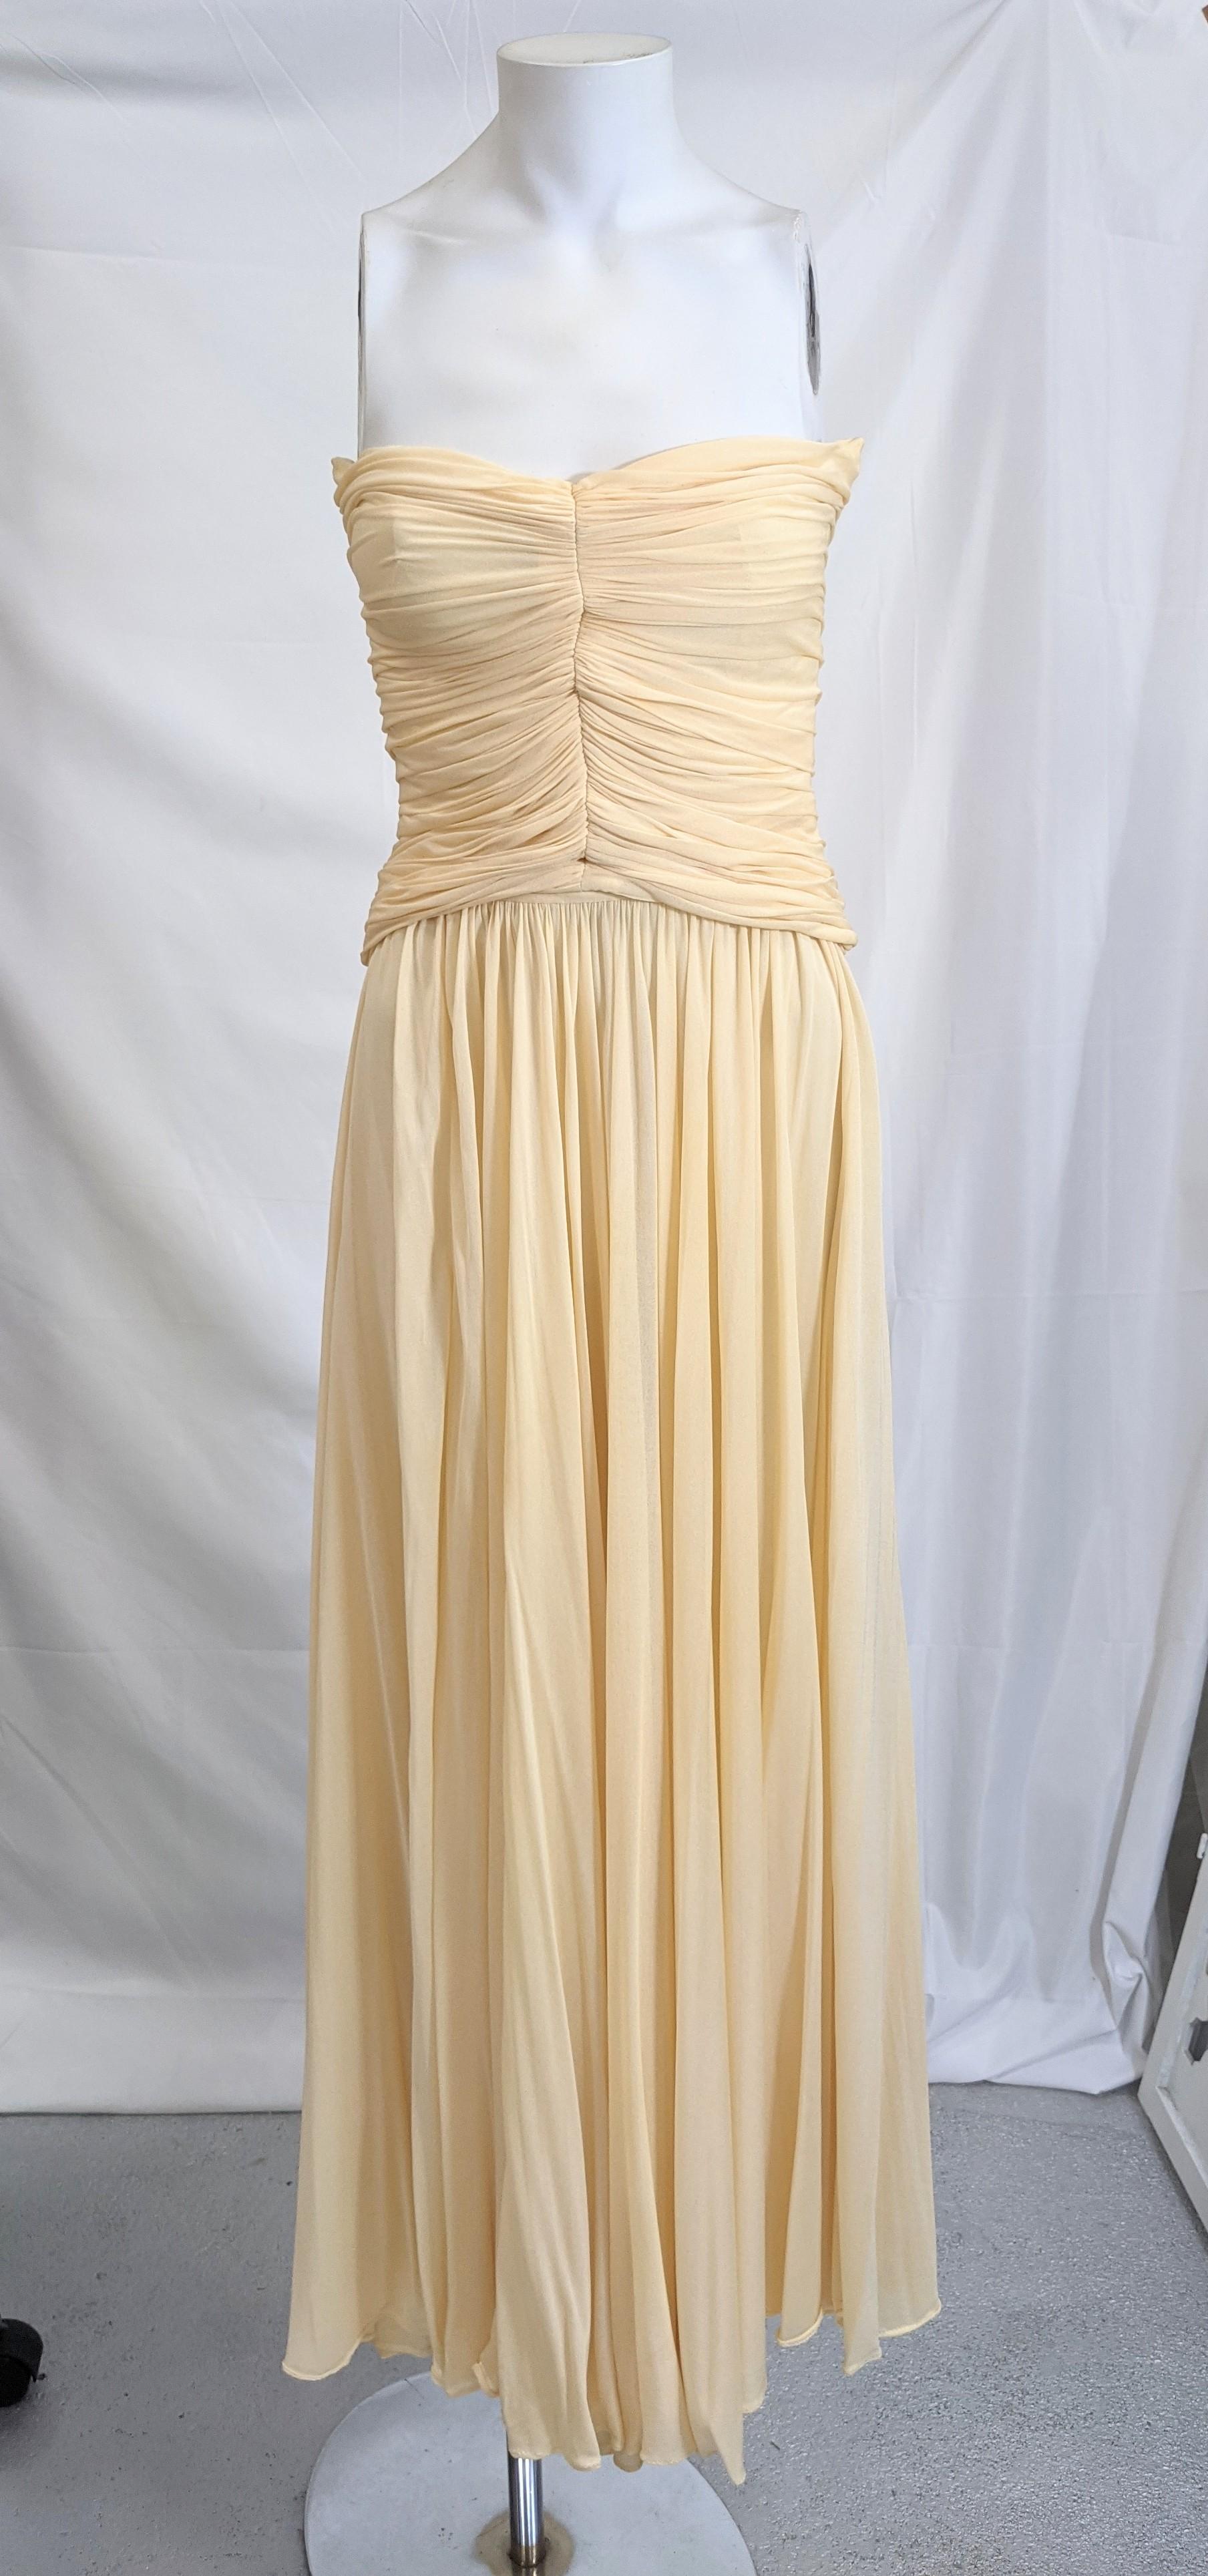 Halston's iconic ivory cream fine silk jersey two piece Grecian goddess dress. The separate strapless boned bustier bodice of ruched and pleated chiffon jersey. The long skirt loosely pleated with gathered waist. Very Good Condition. 
Length of